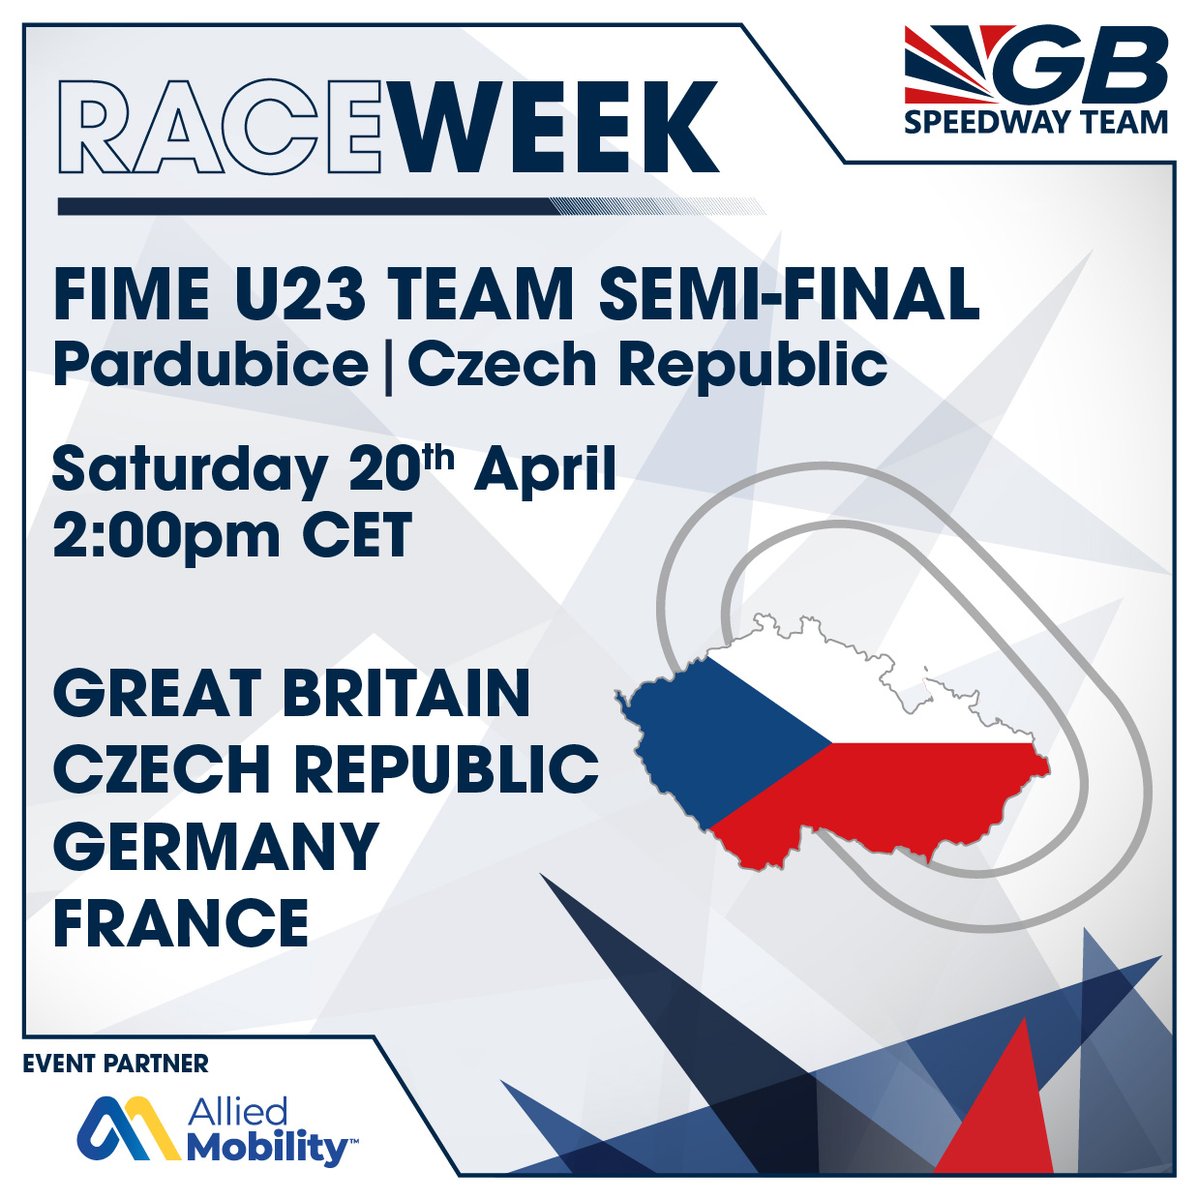 🇬🇧🏁🚀 IT'S RACE WEEK! GB launch their 2024 Season on Saturday in the Czech Republic at the FIME U23 Team Semi-Final. Follow along for updates and interviews! Brought to you by Giant Cash Bonanza ➡️ giantcashbonanza.online/gbspeedway/ @alliedmobility @ArcticCabinsLtd @Cabin_Master…